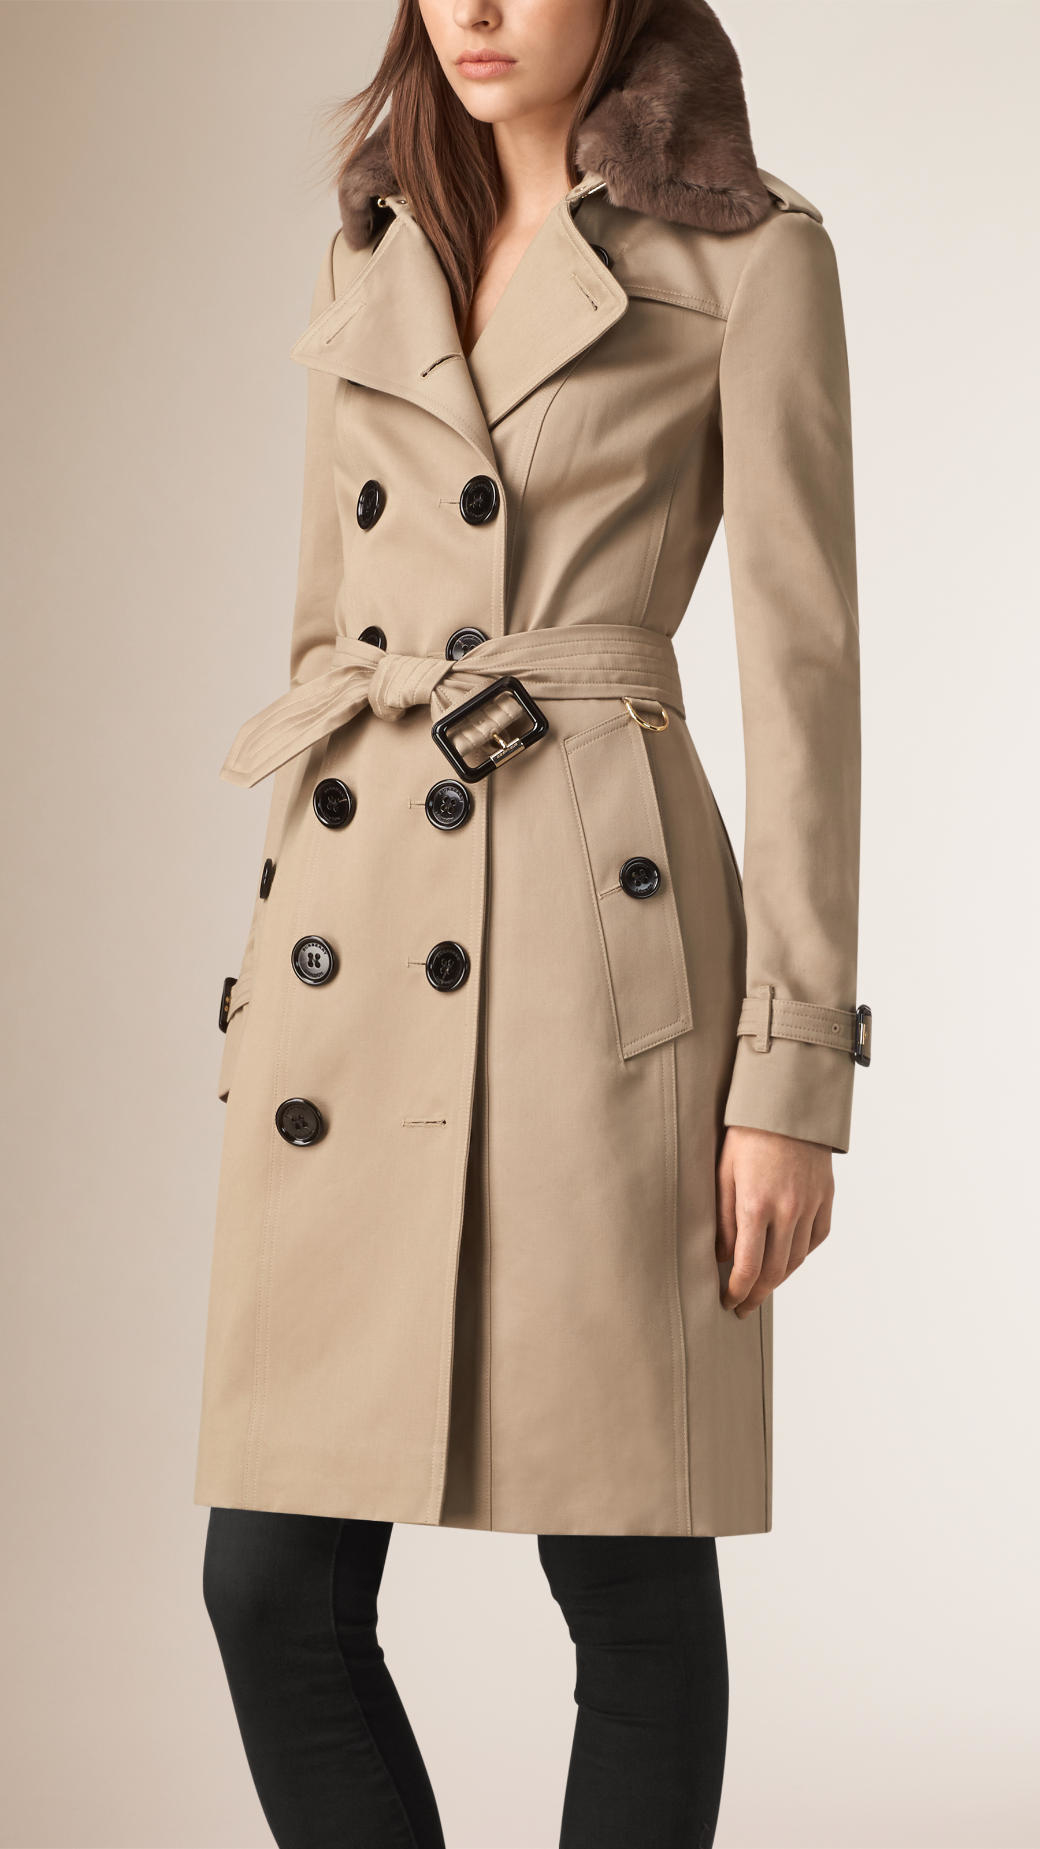 Burberry Fur Collar Cotton Trench Coat in Taupe Brown (Brown) - Lyst